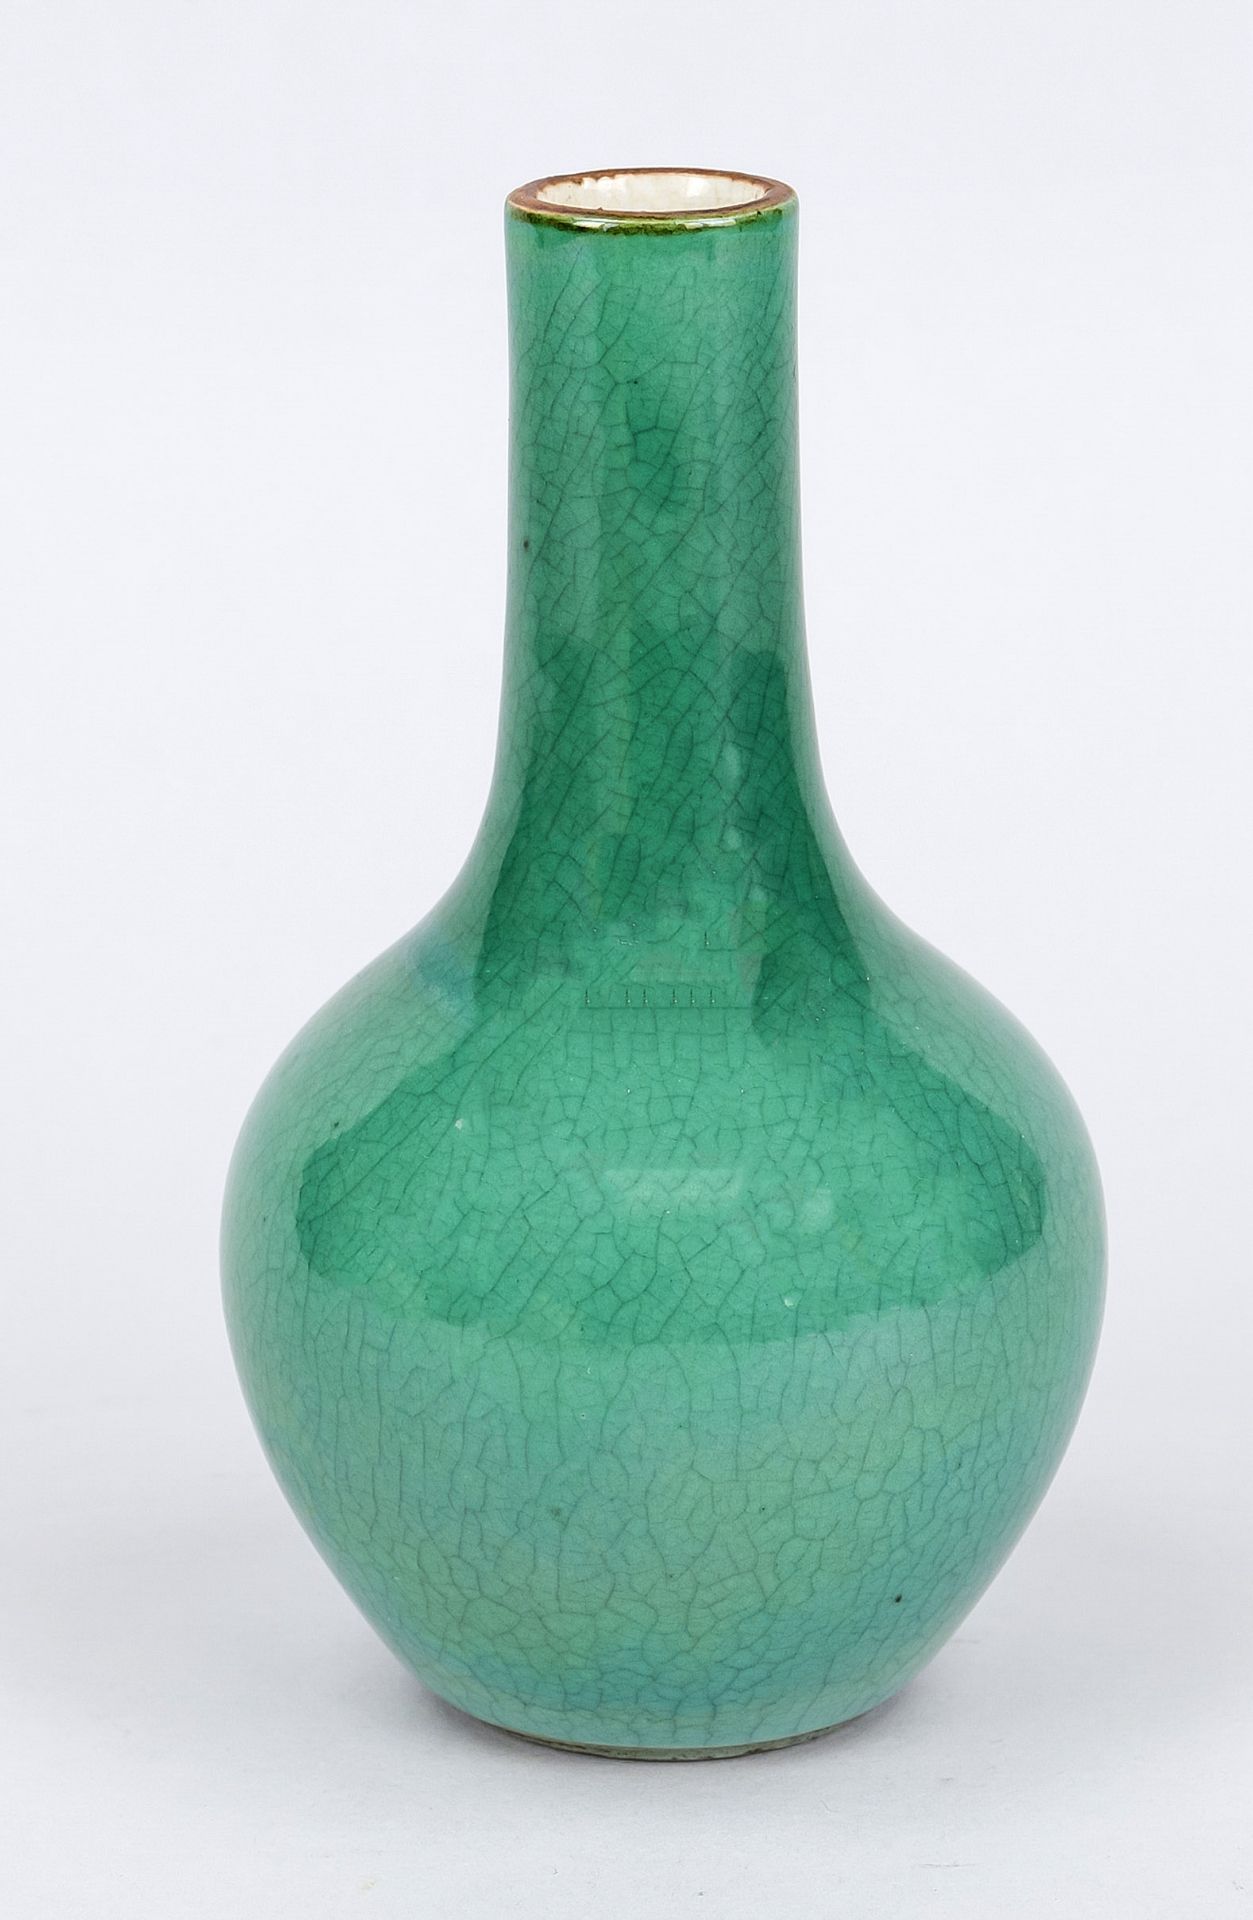 Small monochrome vase, China, probably 19th century Bellied body with slender neck, apple-green